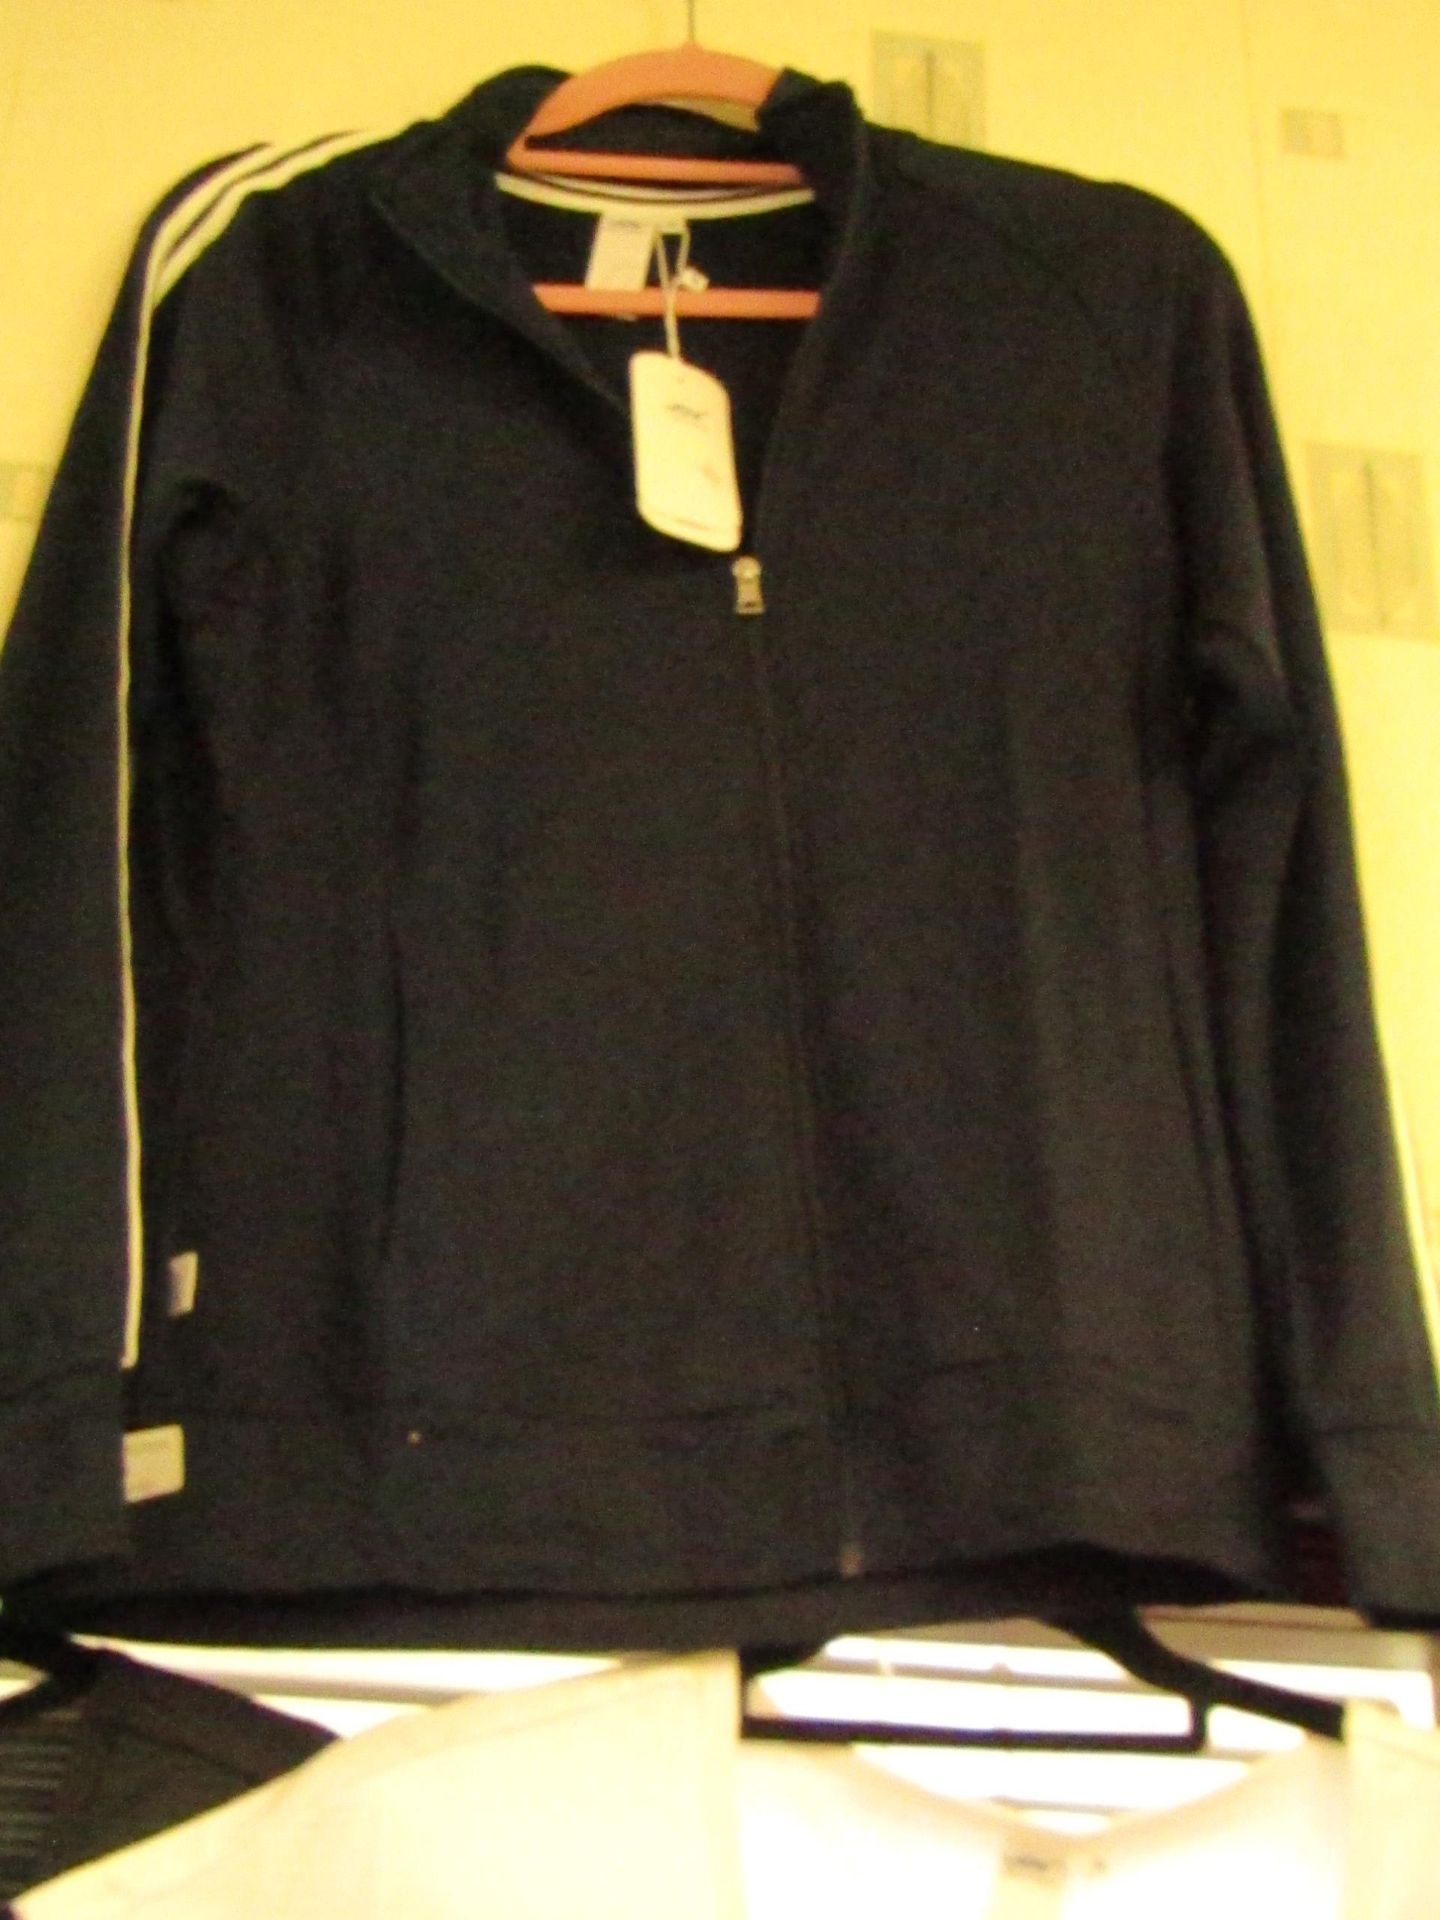 1 x Joy Sportswear Jacket size 38 new with tag see image for design